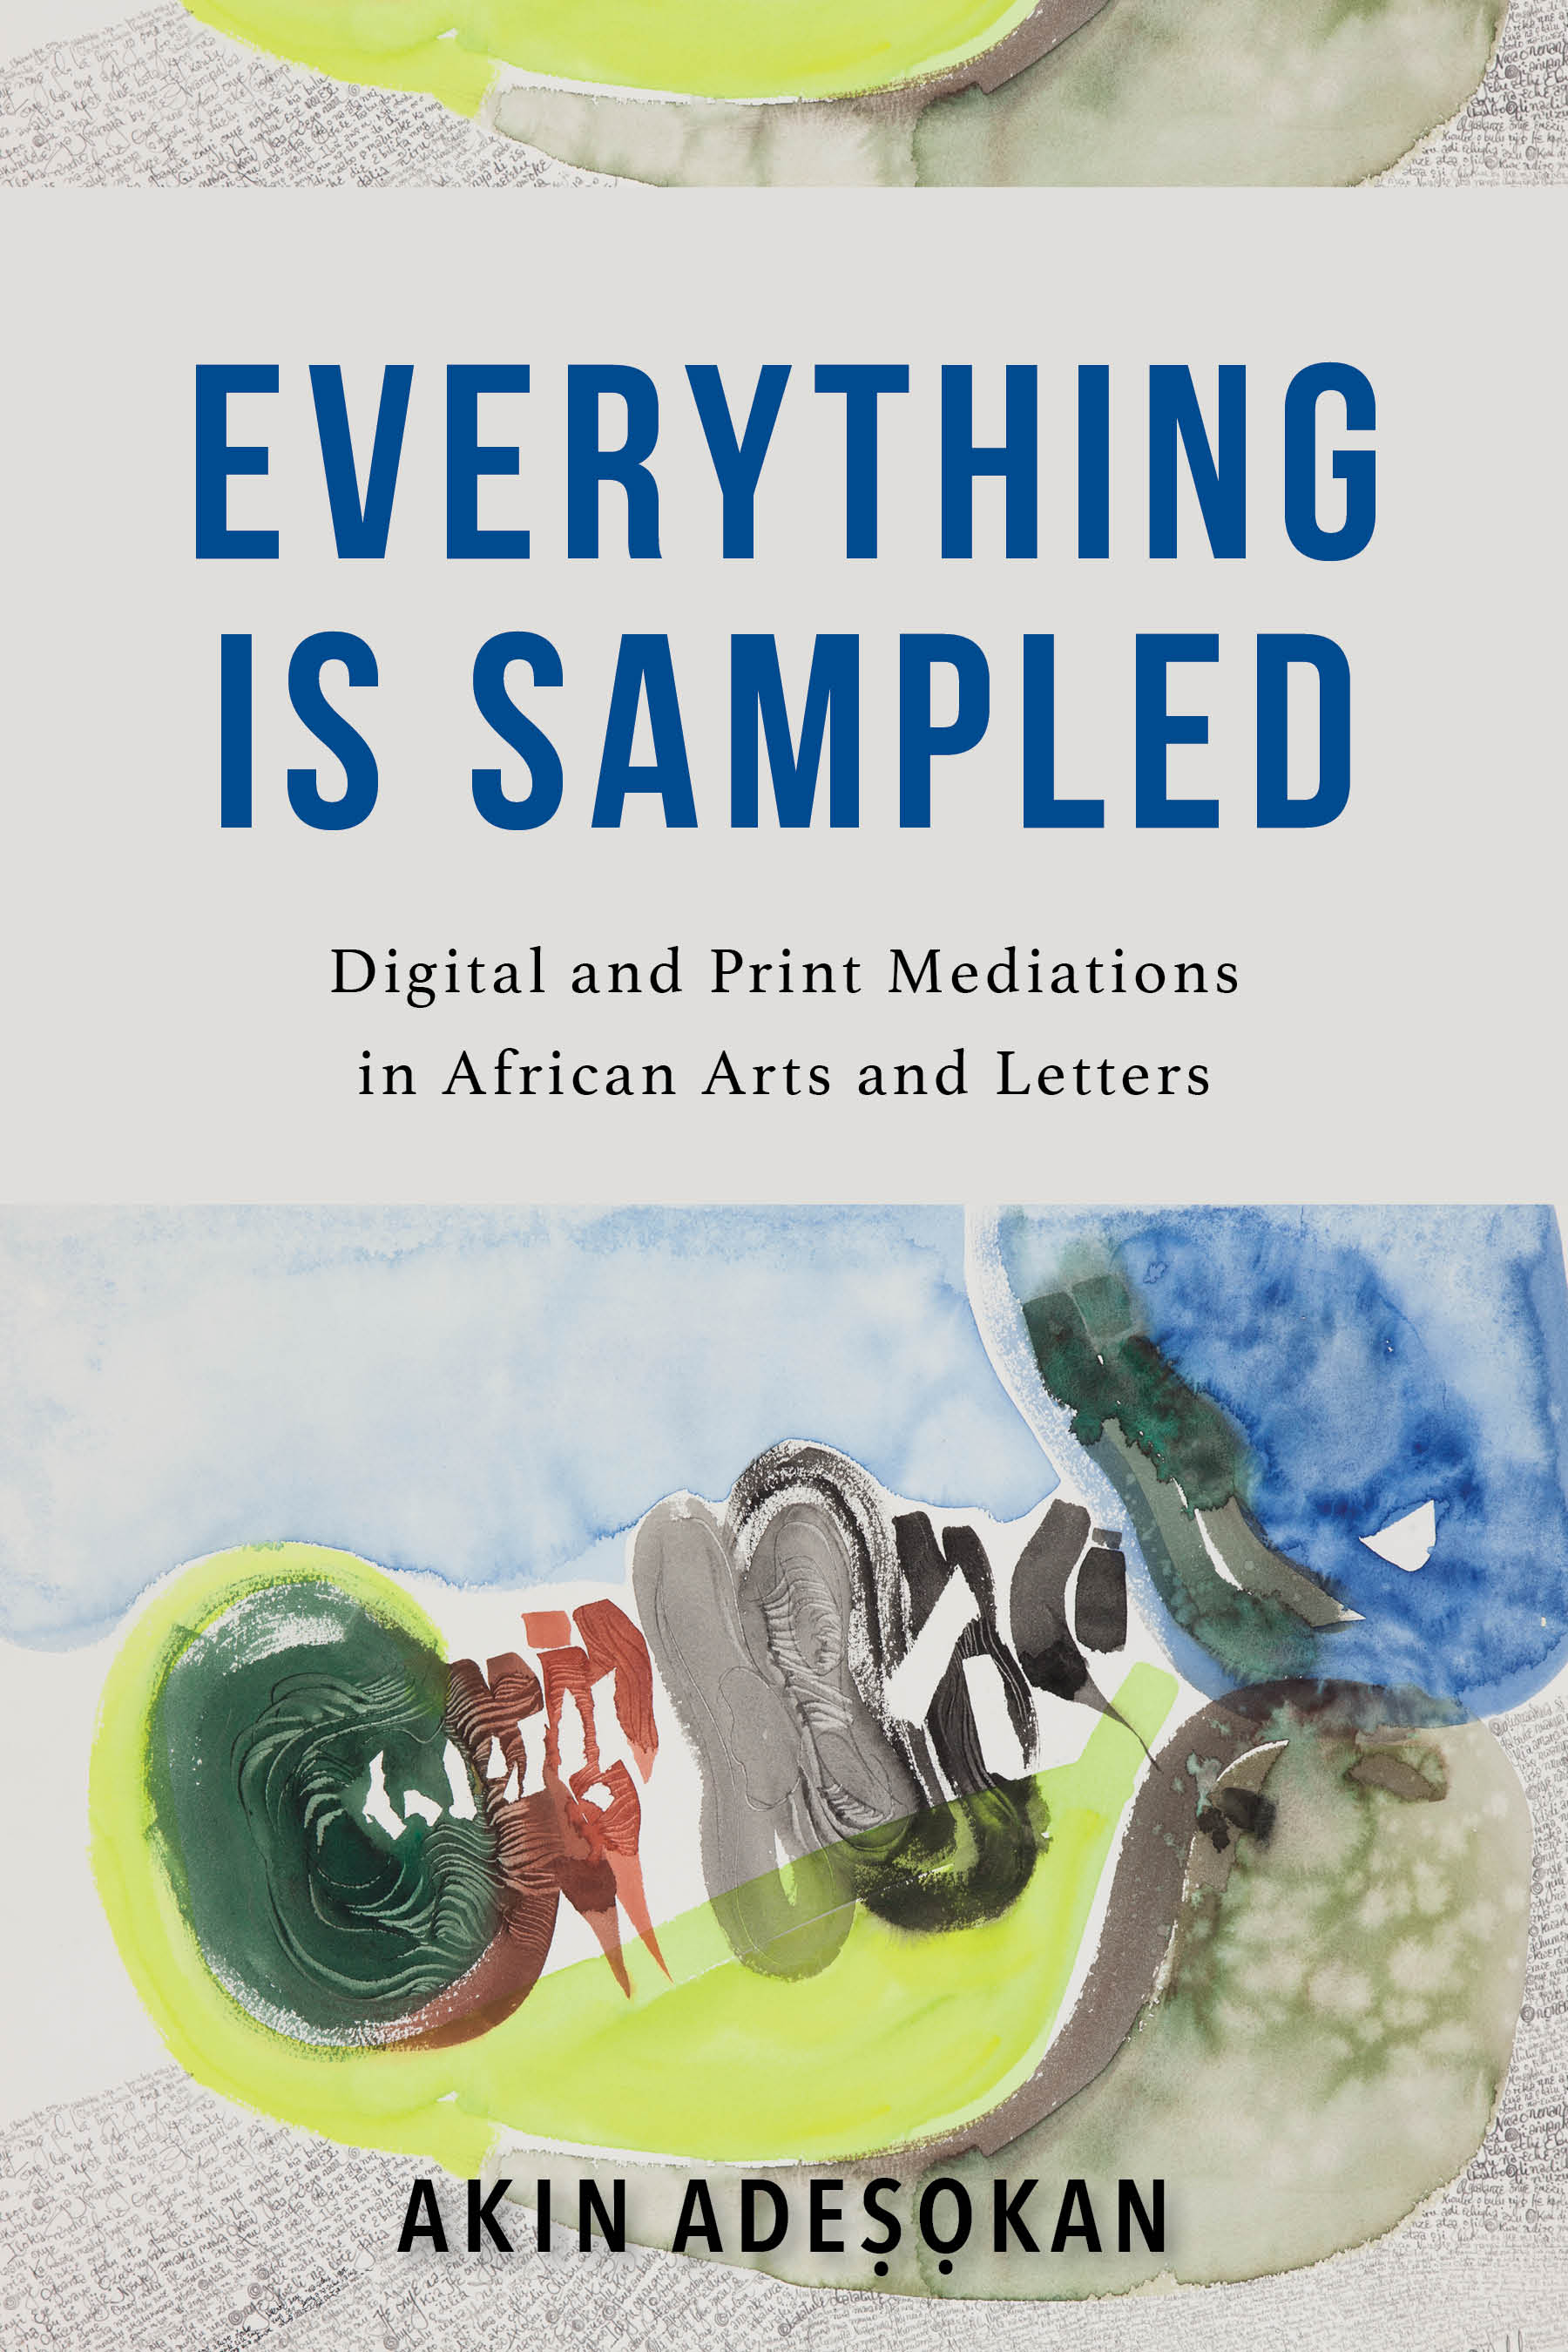 Everything is Sampled: Digital and Print Mediations in African Arts and Letters